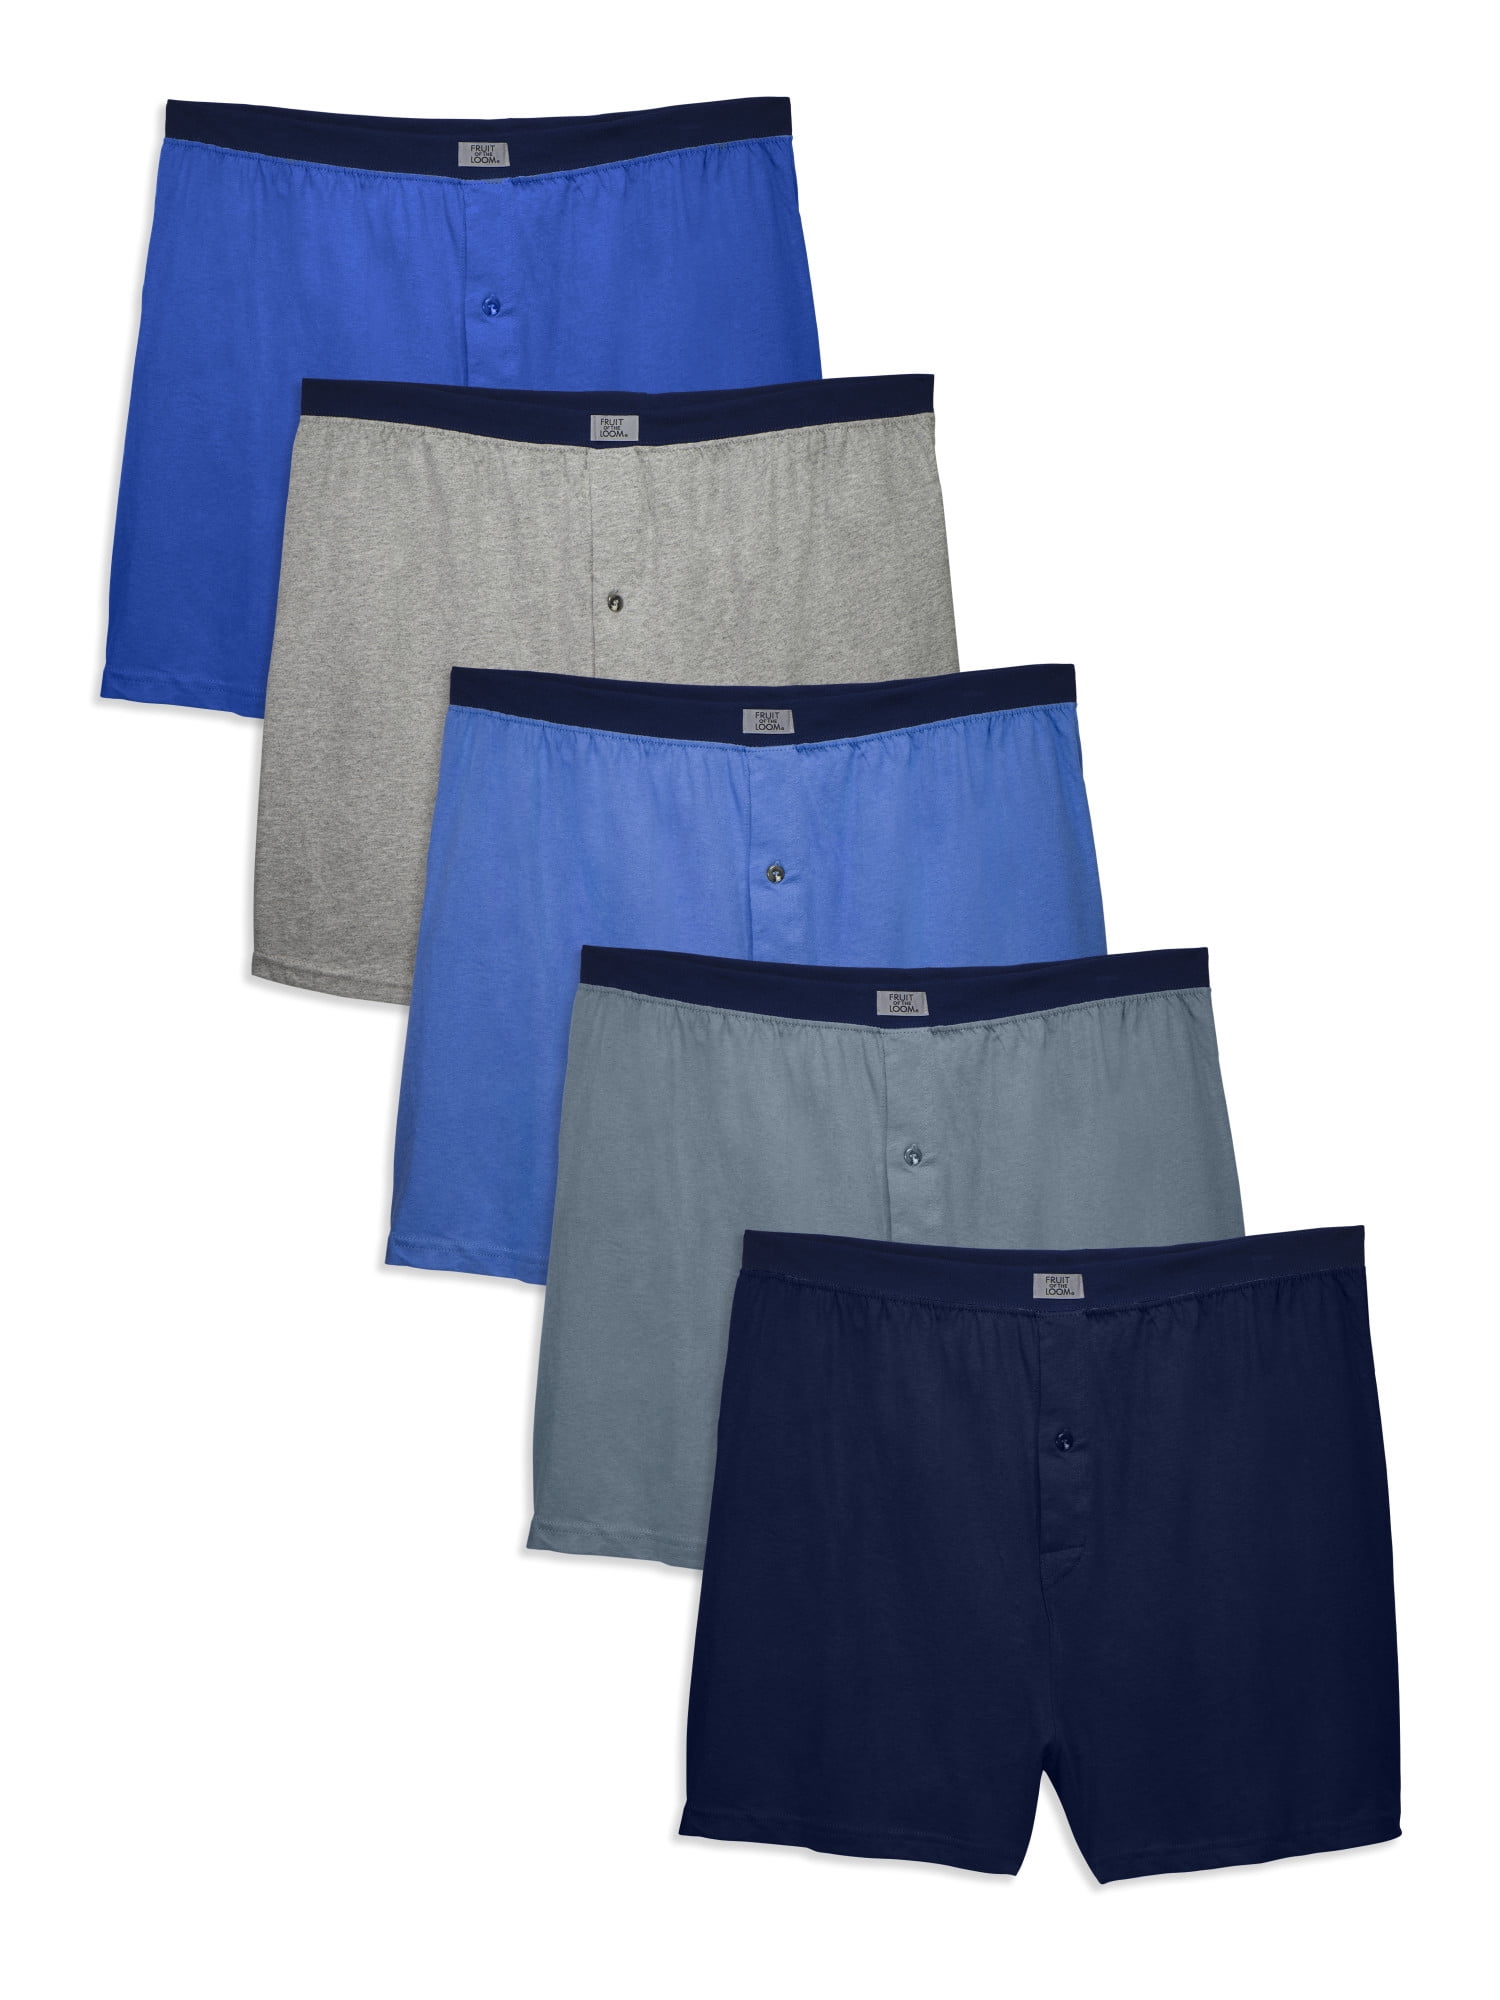 Fruit of the Loom Men's Assorted Knit Boxers, 5 Pack - Walmart.com